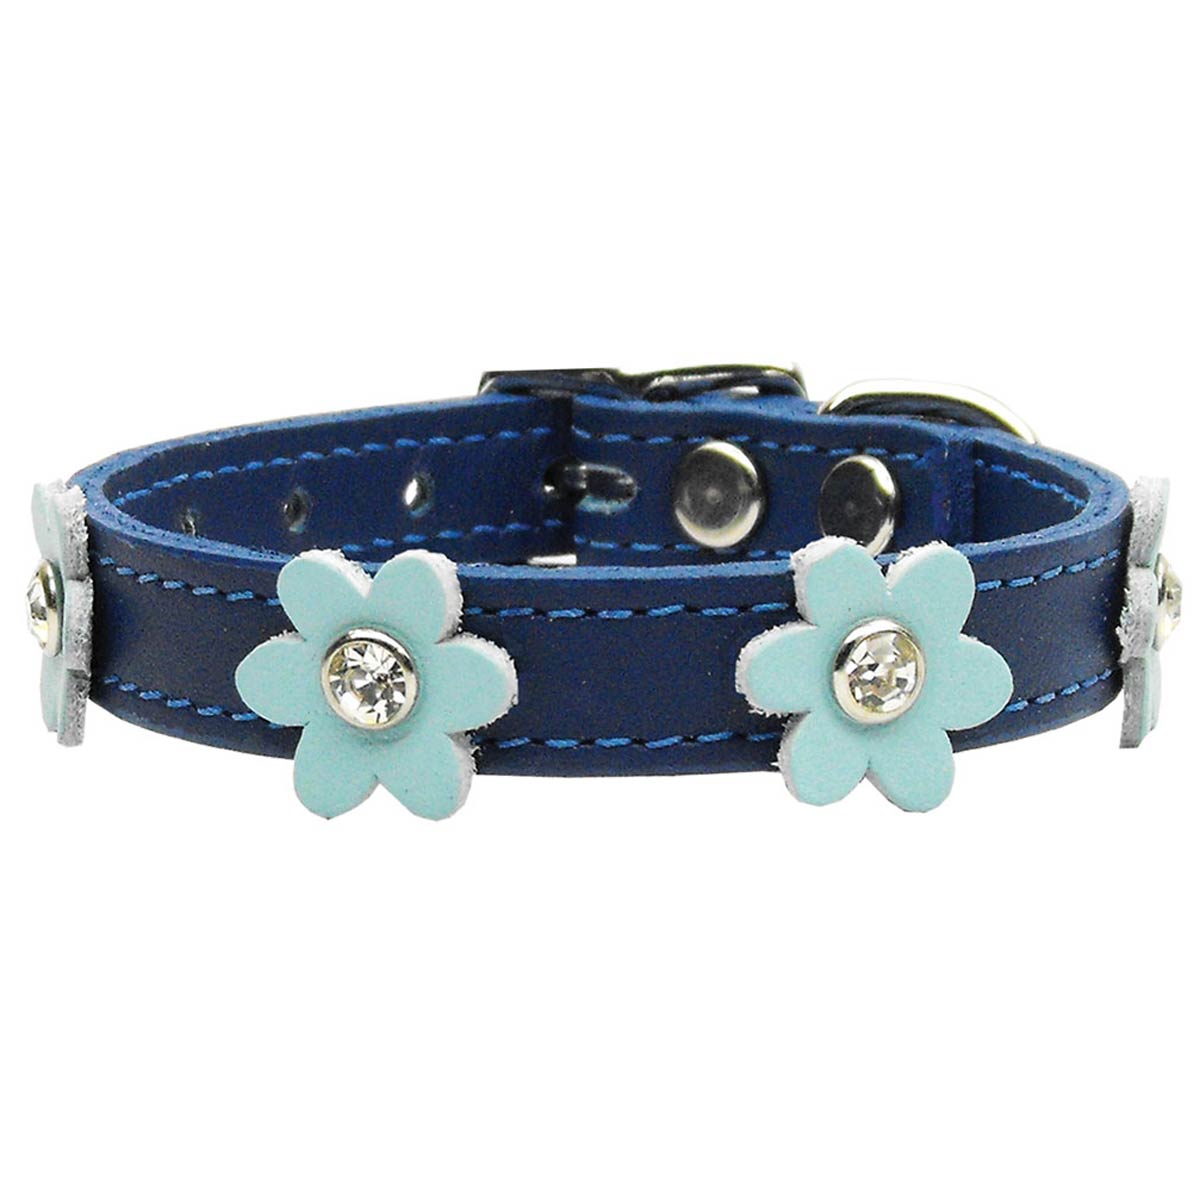 Flower Blue Leather Dog Collar - Baby Blue Flowers